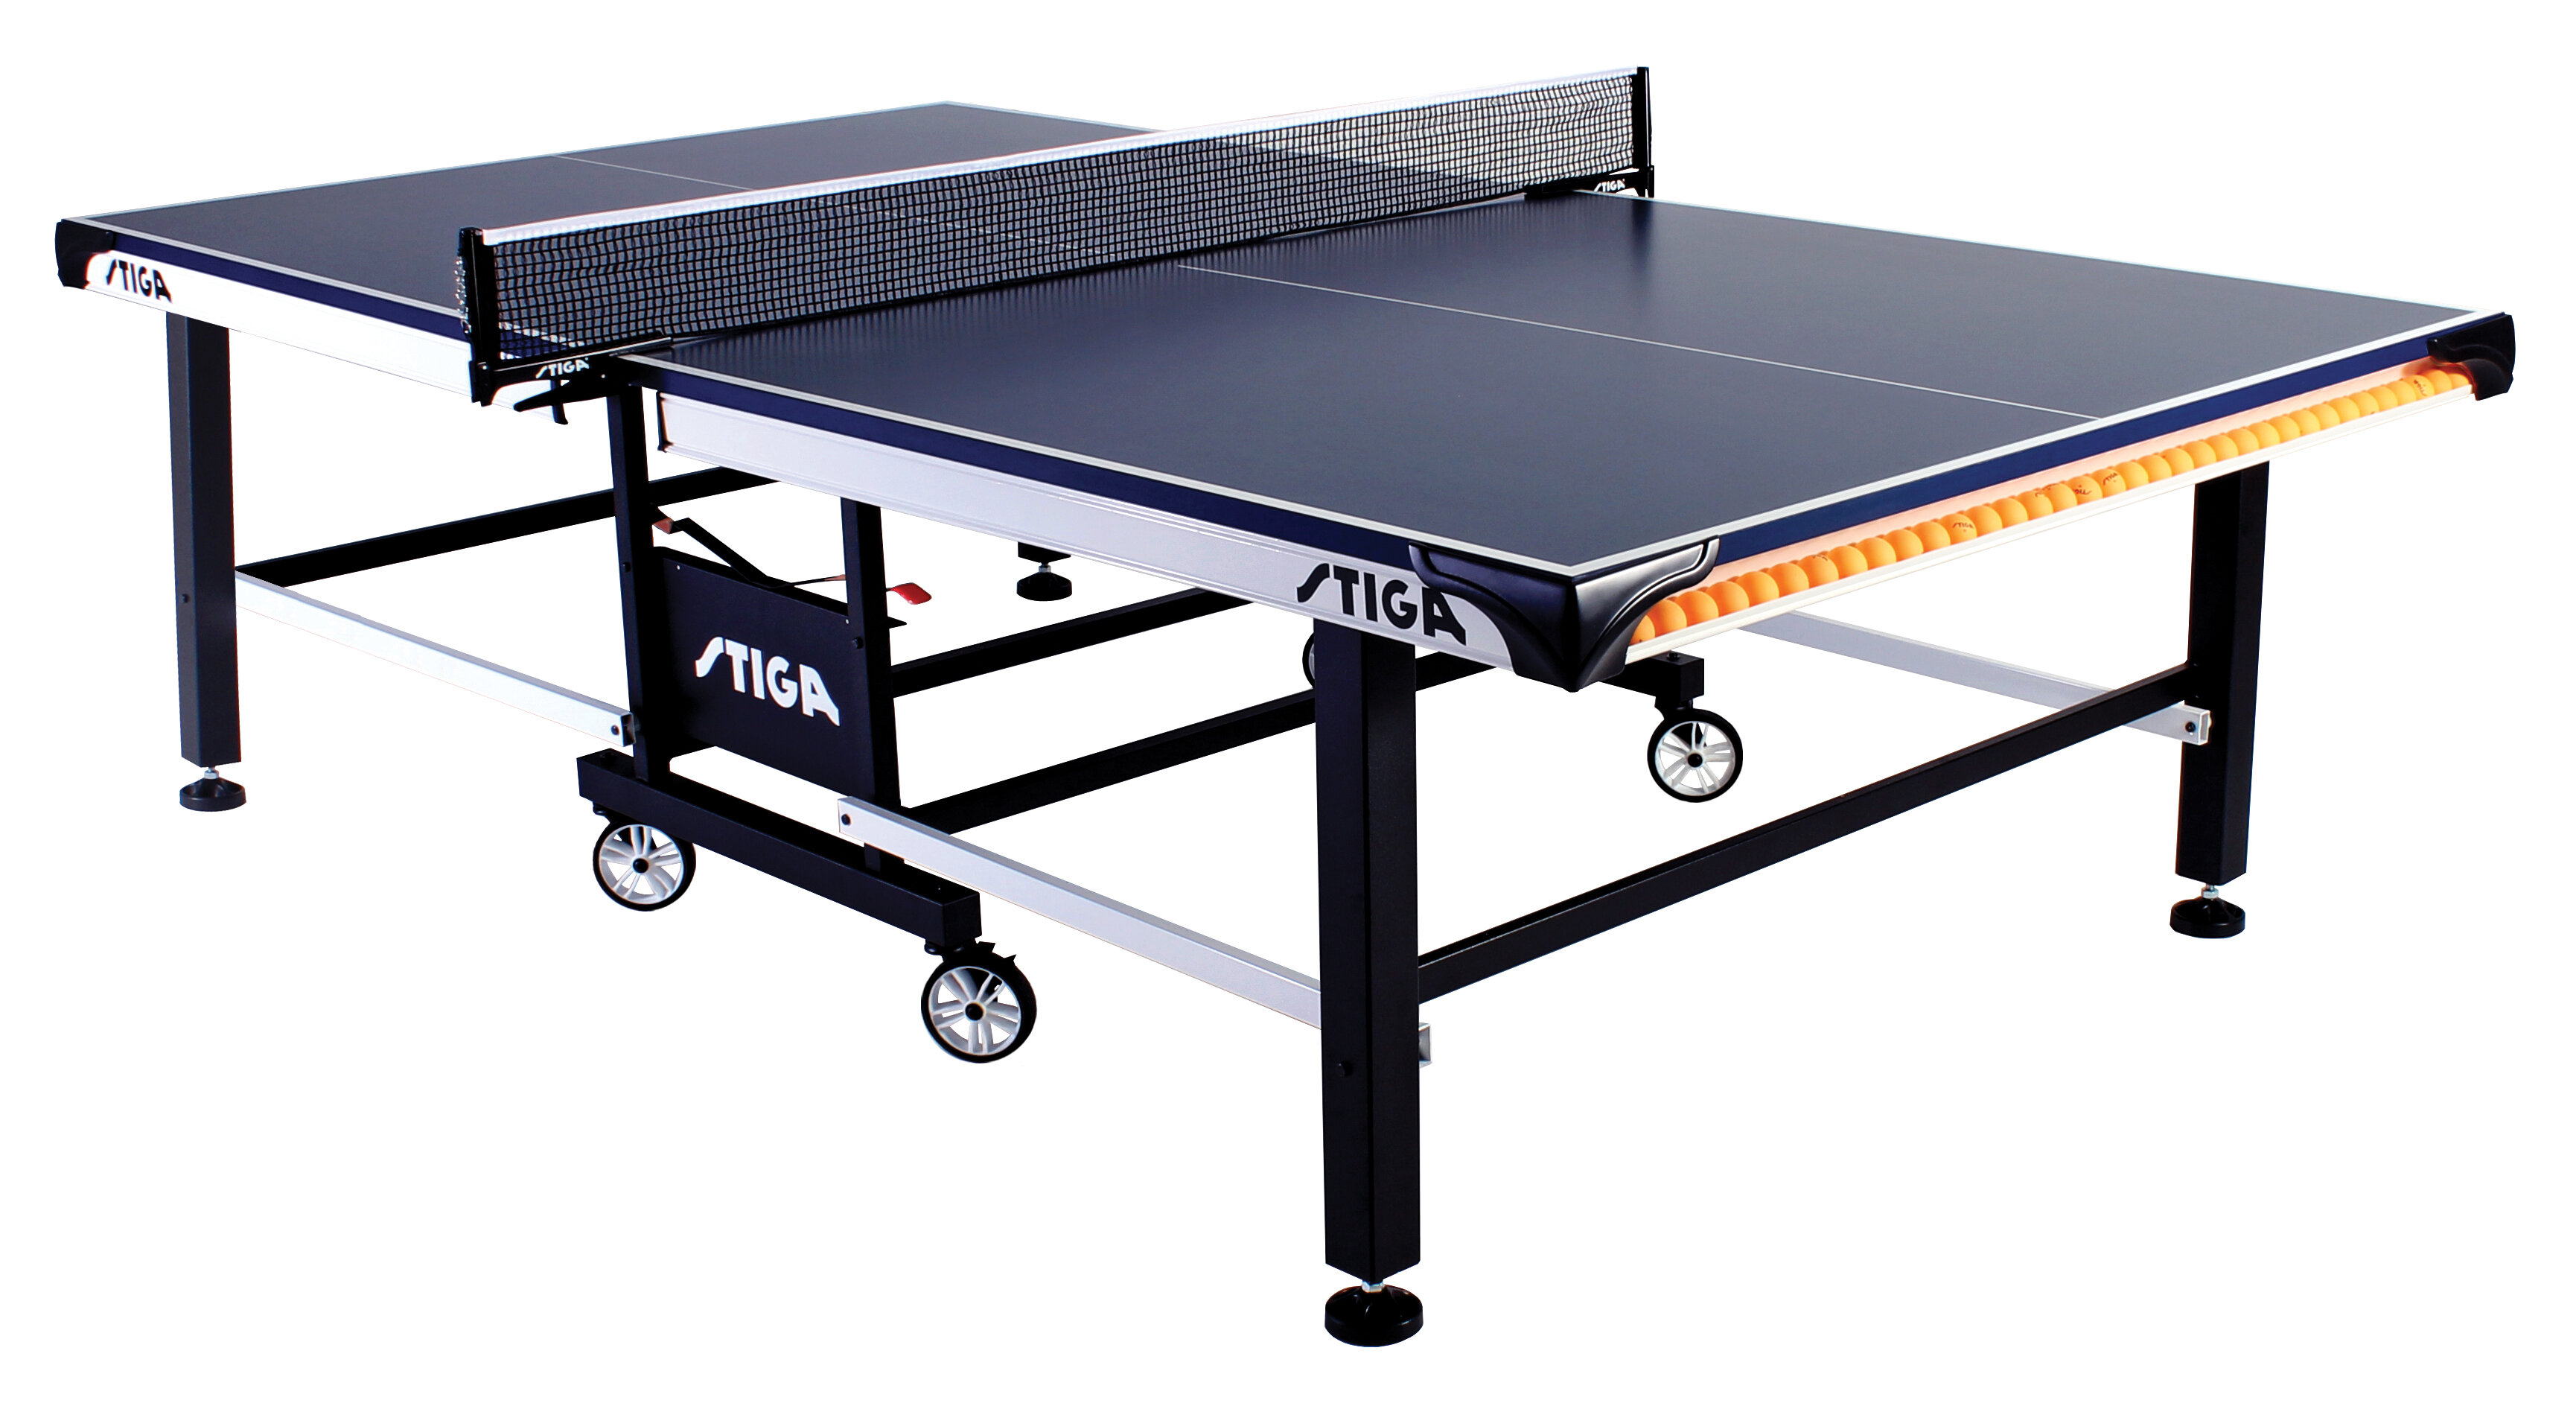 Stiga STS 520 Regulation Size Foldable Indoor Table Tennis Table (25mm Thick) and Reviews Wayfair